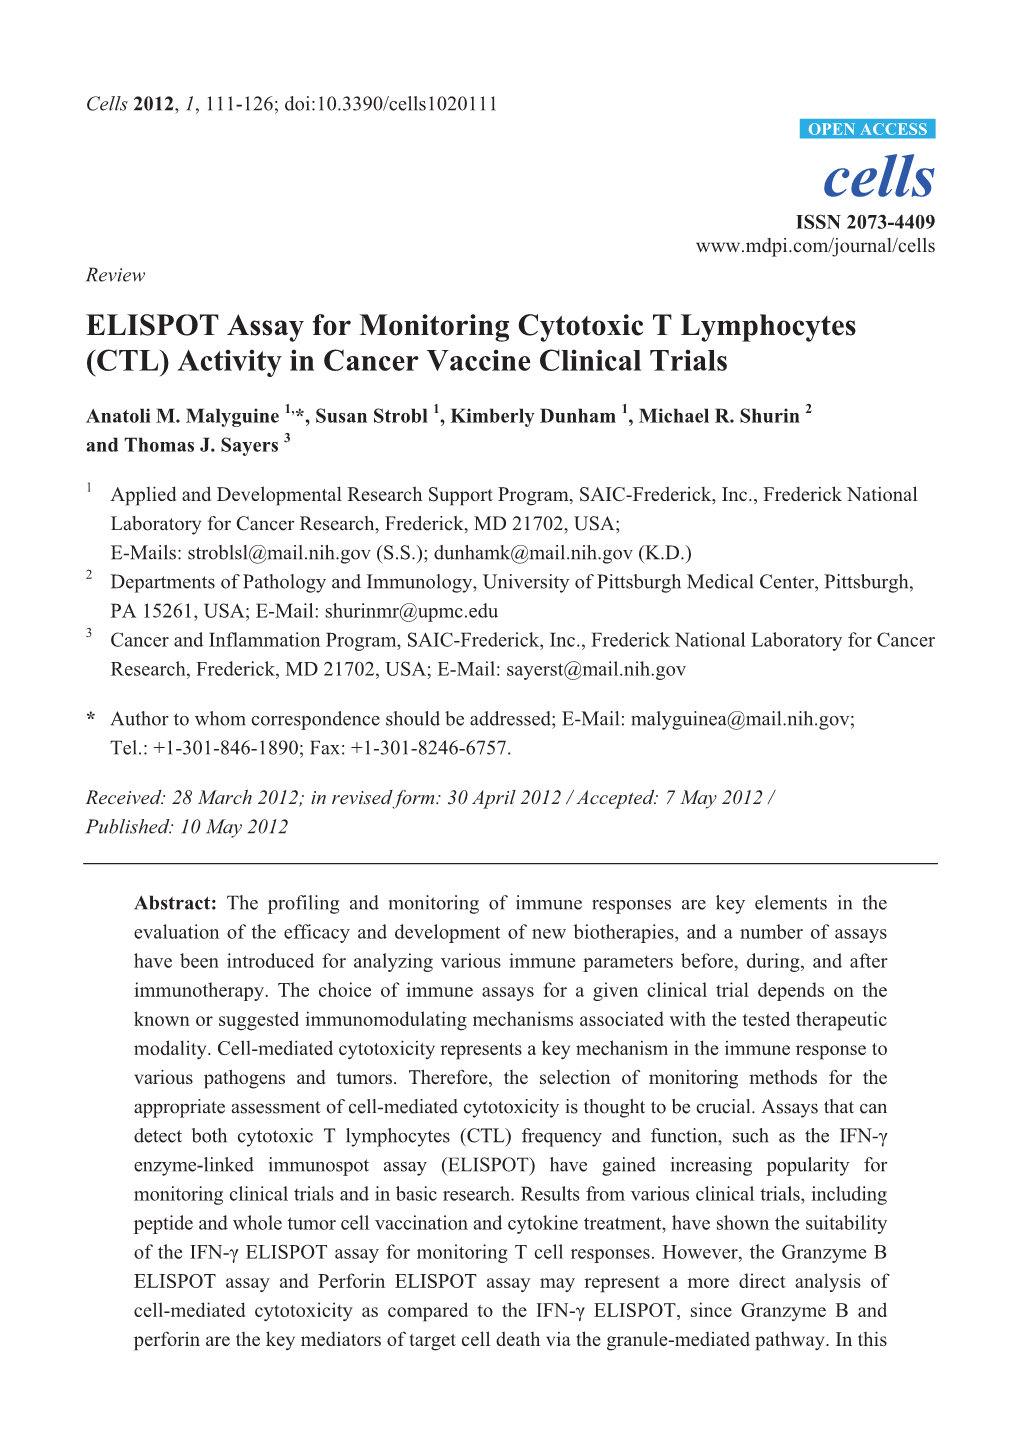 ELISPOT Assay for Monitoring Cytotoxic T Lymphocytes (CTL) Activity in Cancer Vaccine Clinical Trials